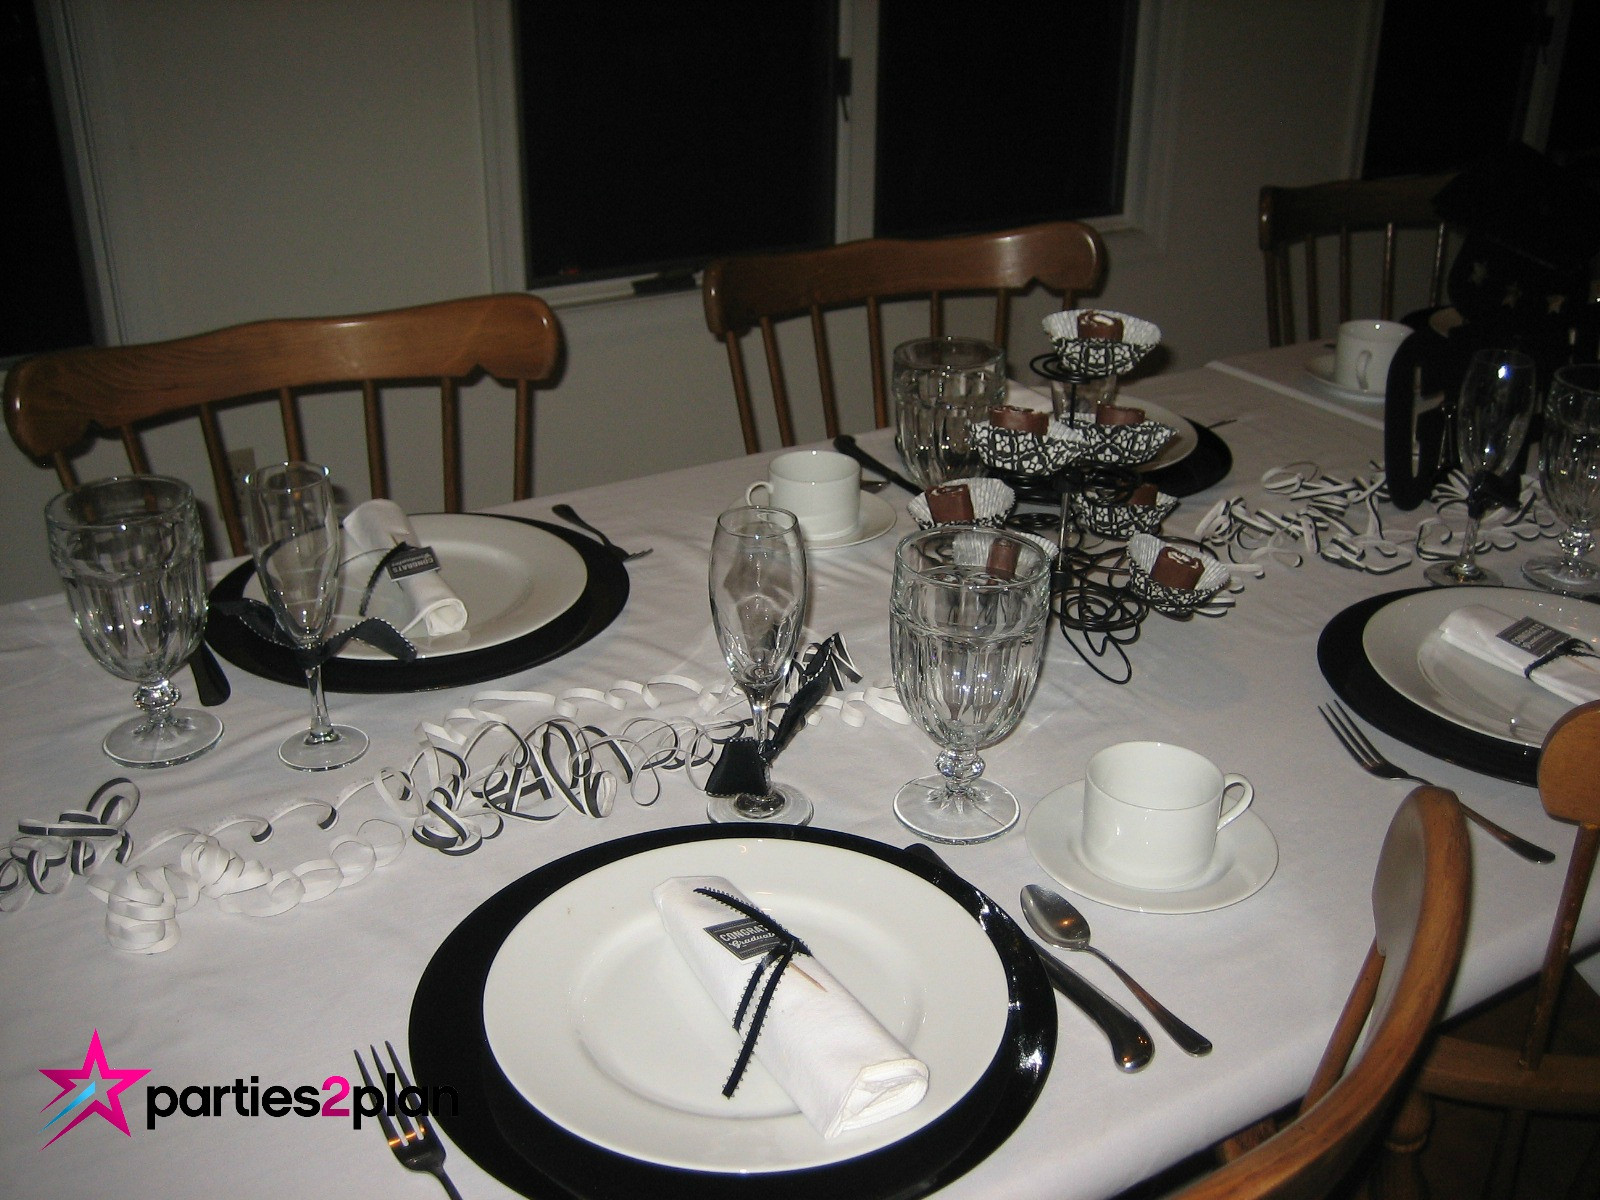 Graduation Party Table Setting Ideas
 Tablescape Graduation Family Dinner Party Table